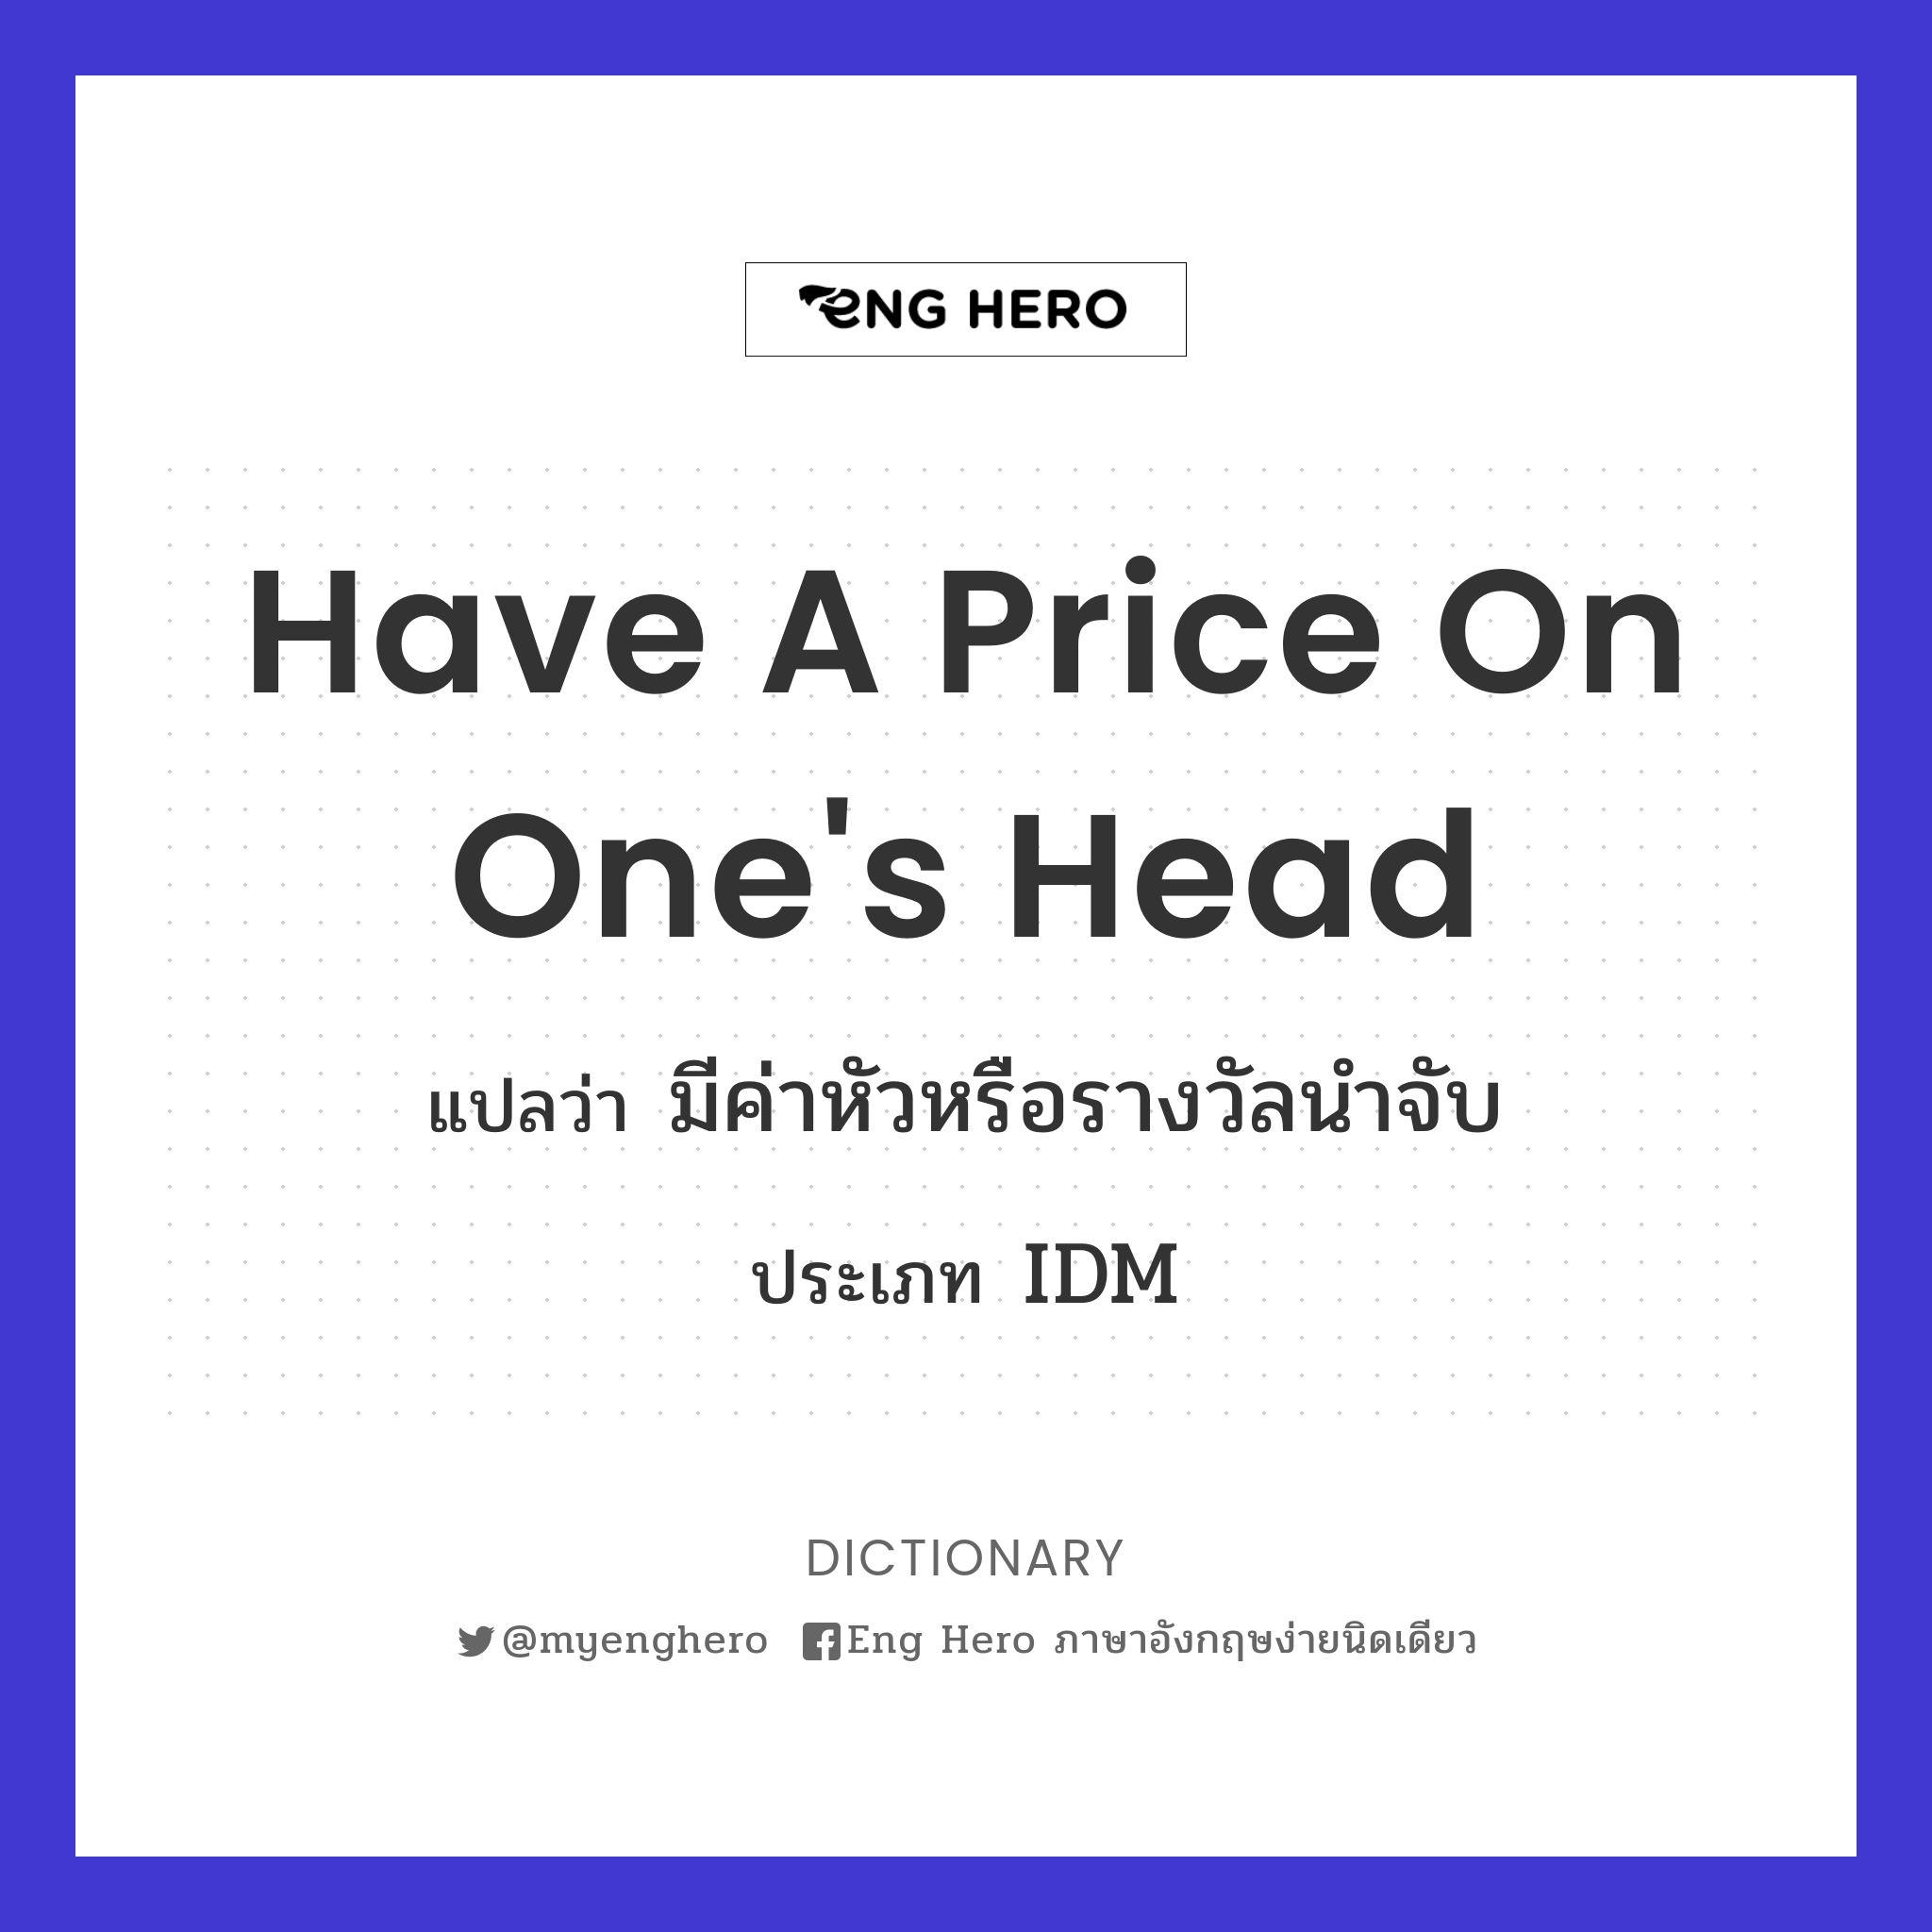 have a price on one's head